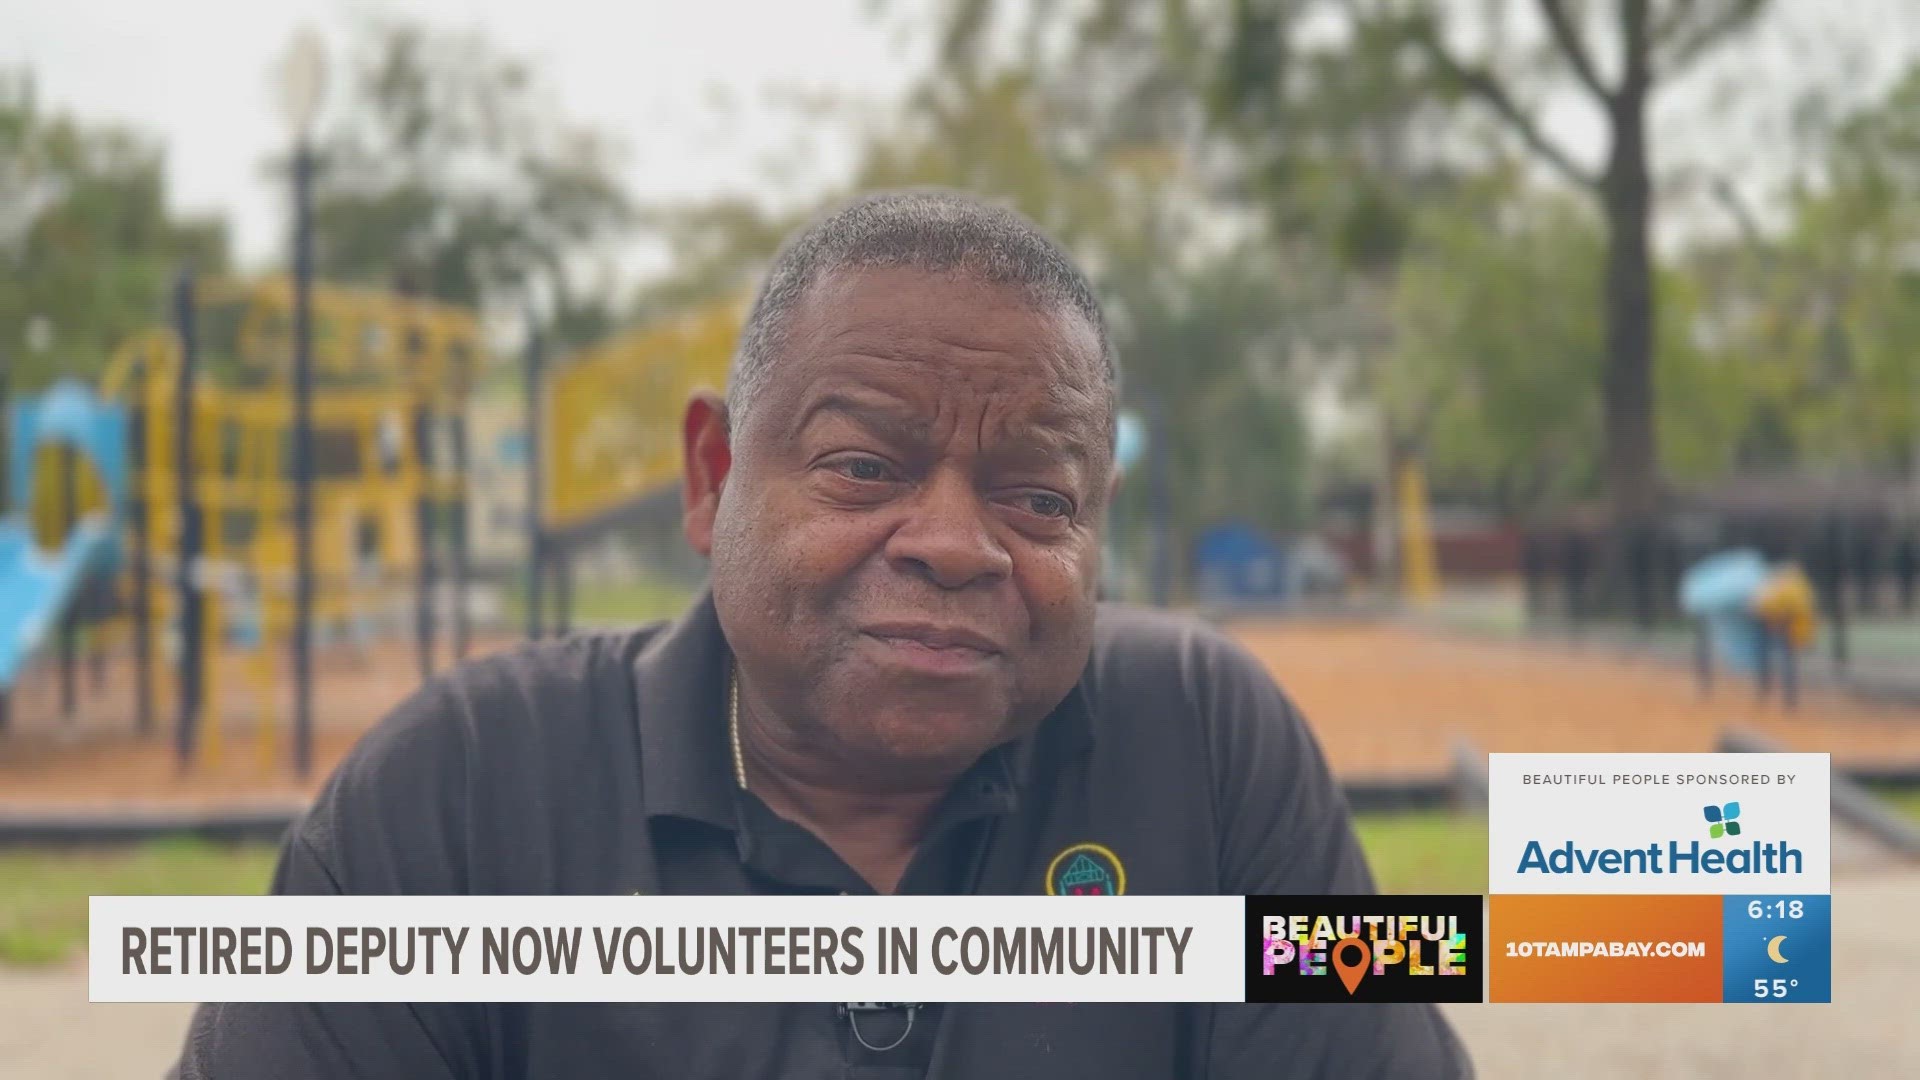 Leon Paige is a retired Hillsborough Deputy who still volunteers to help the community he patrolled.